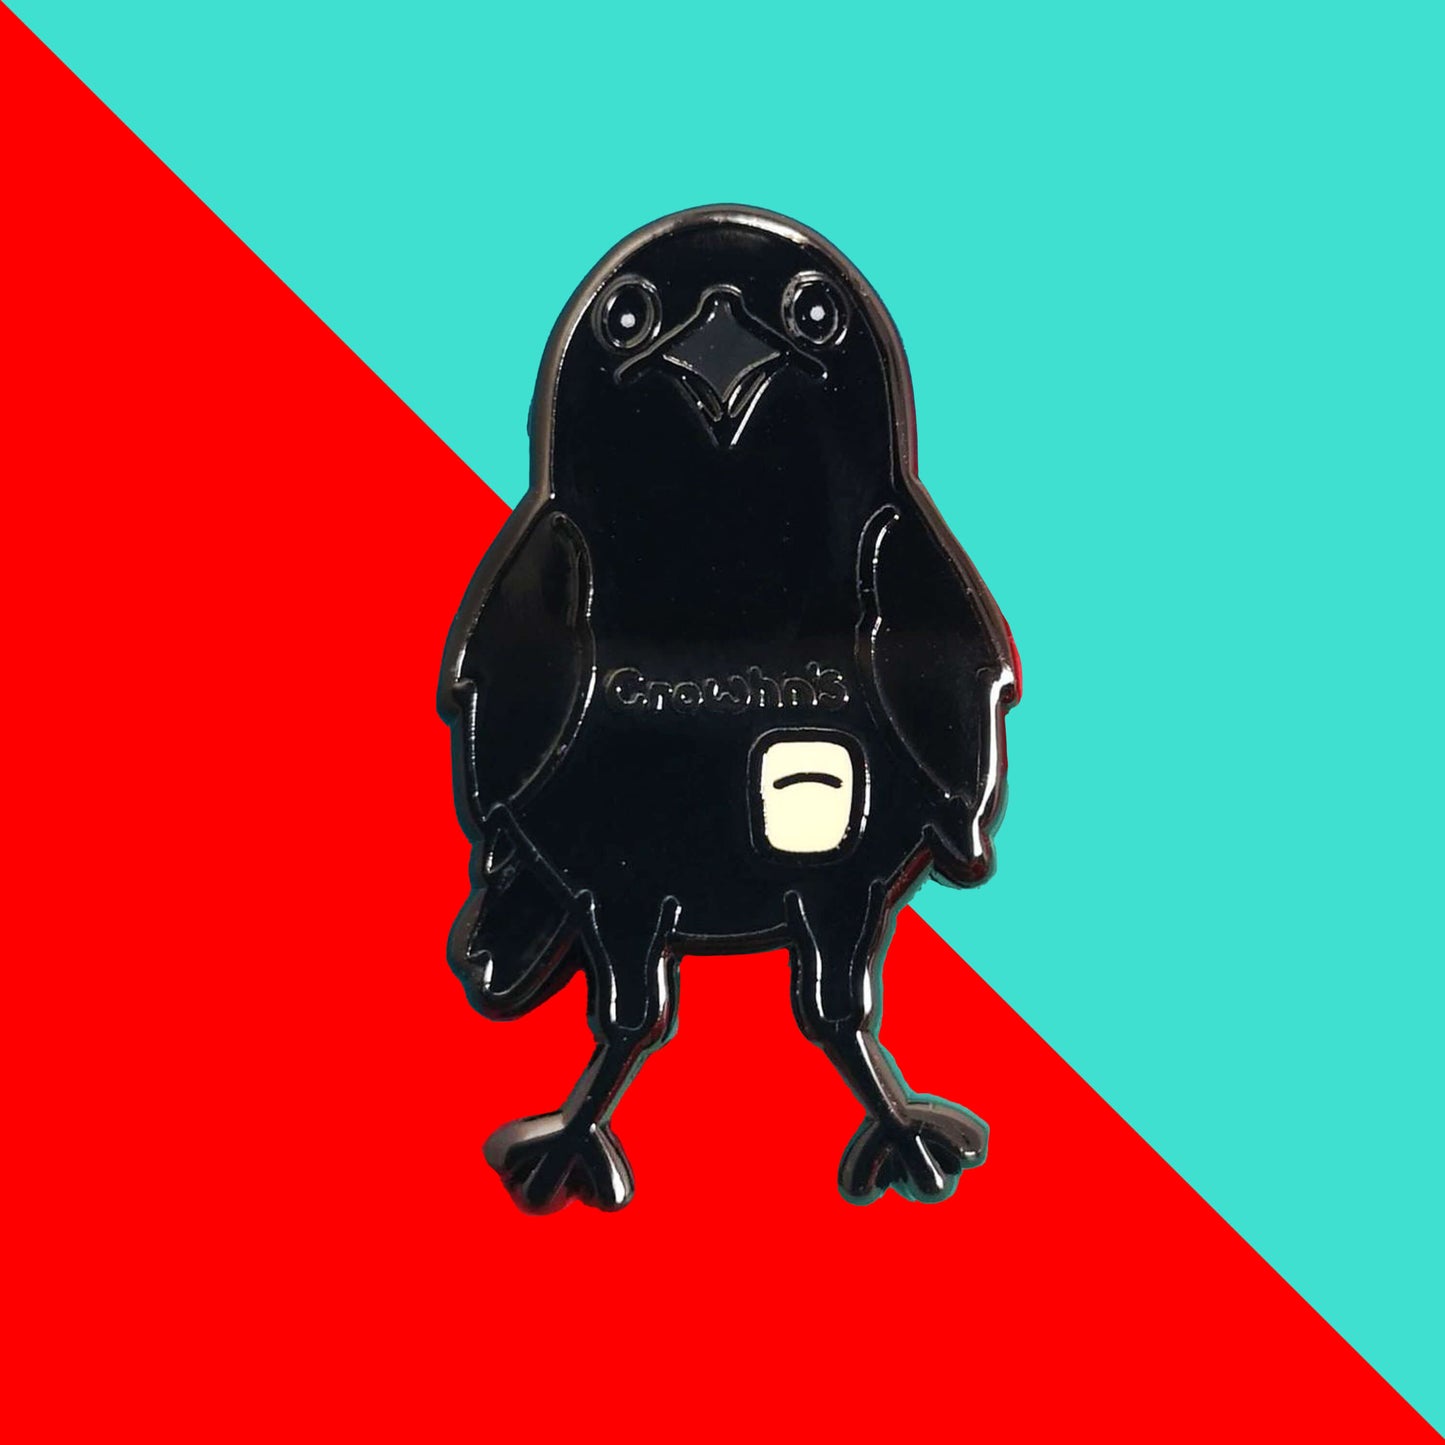 The Crowhn's Disease Enamel Pin - Crohn's Disease on a red and blue background. The black crow shape pin has a white stoma bag fitted and the text reading 'chrowhn's' across its chest. The design is raising awareness for crohn's disease.